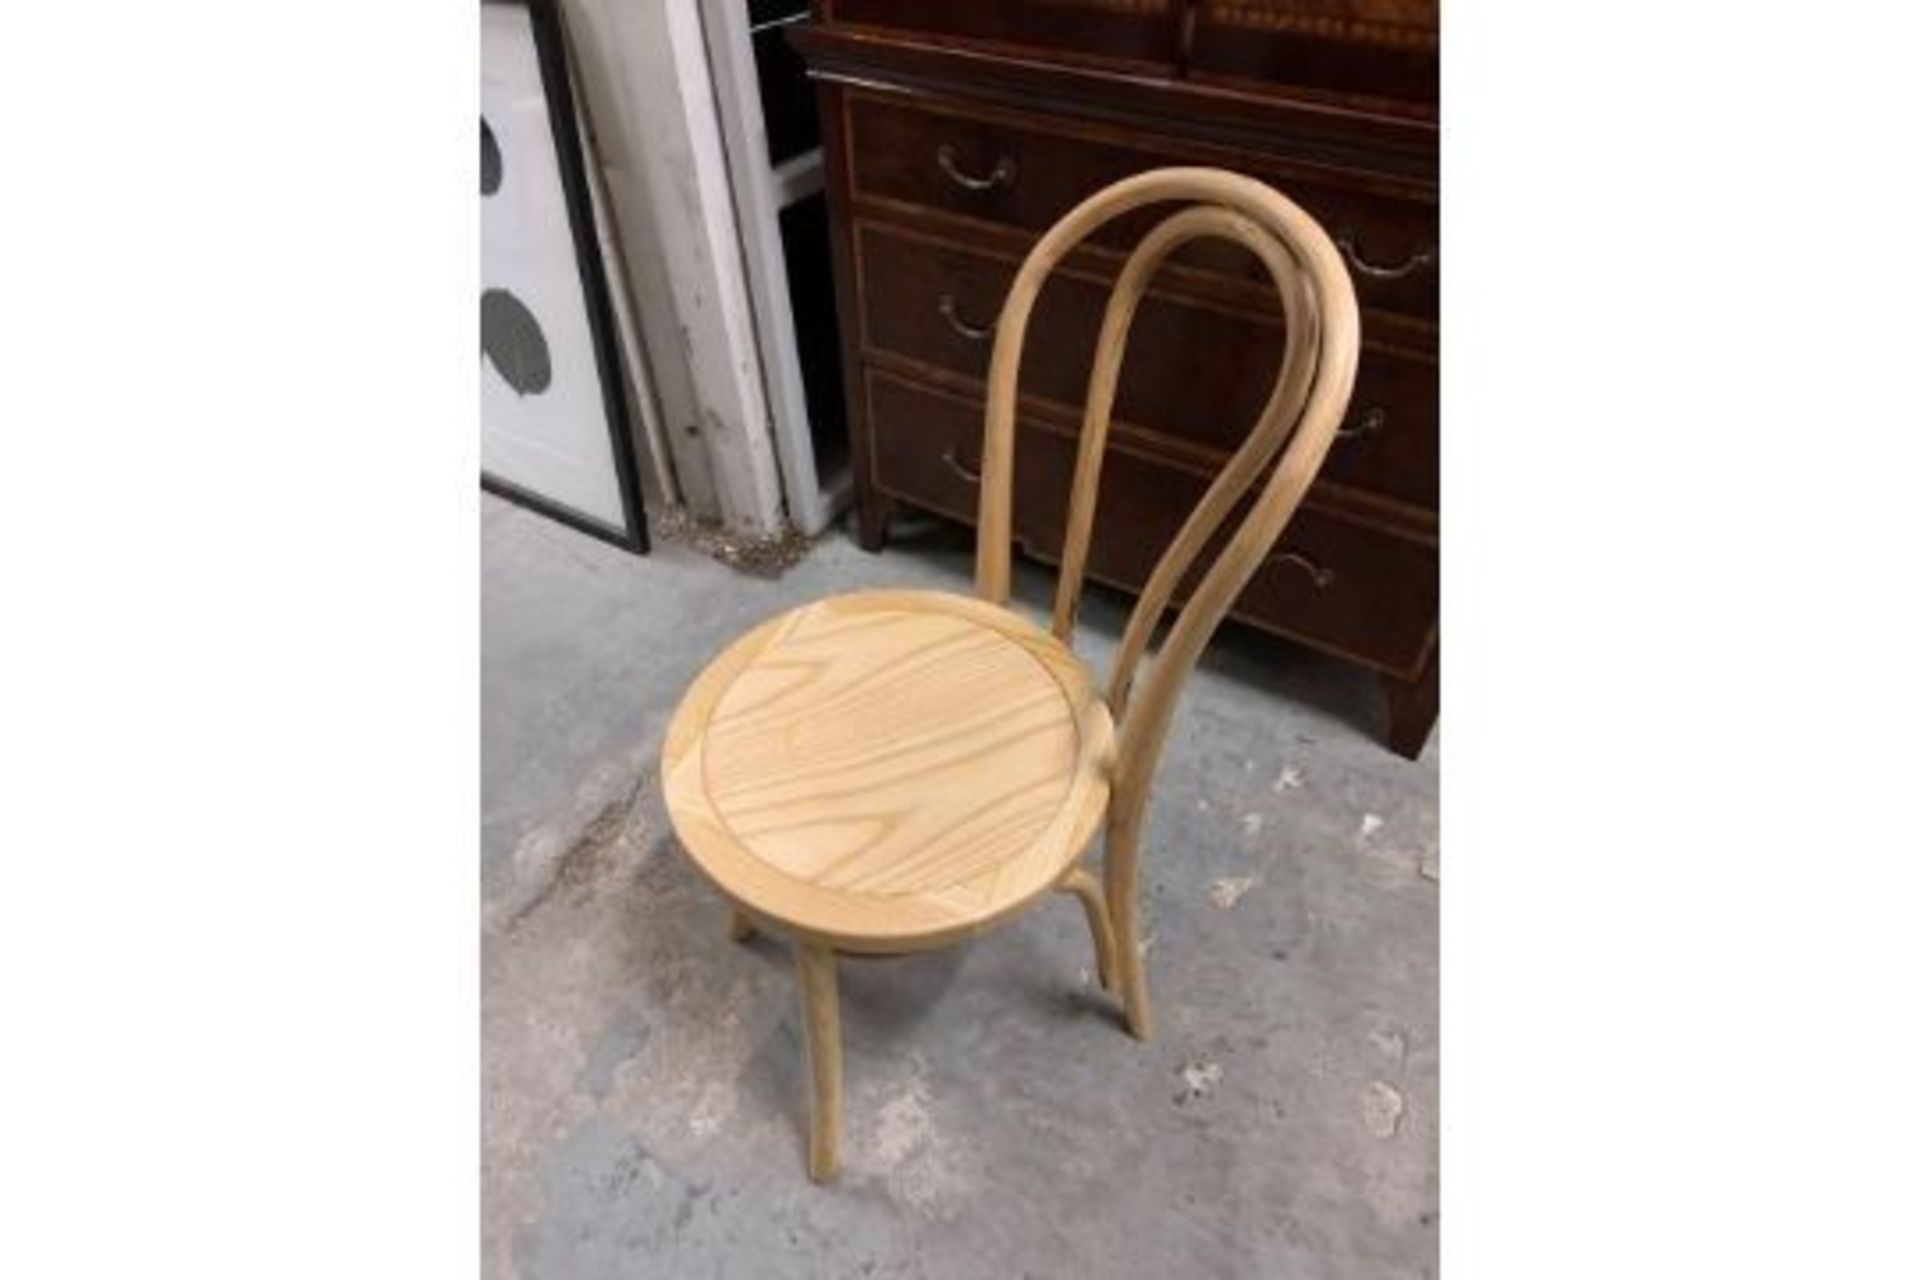 A pair of Foy natural chairs Foy Chairs Natural This Foy Natural Dining Chair Offers A Classic